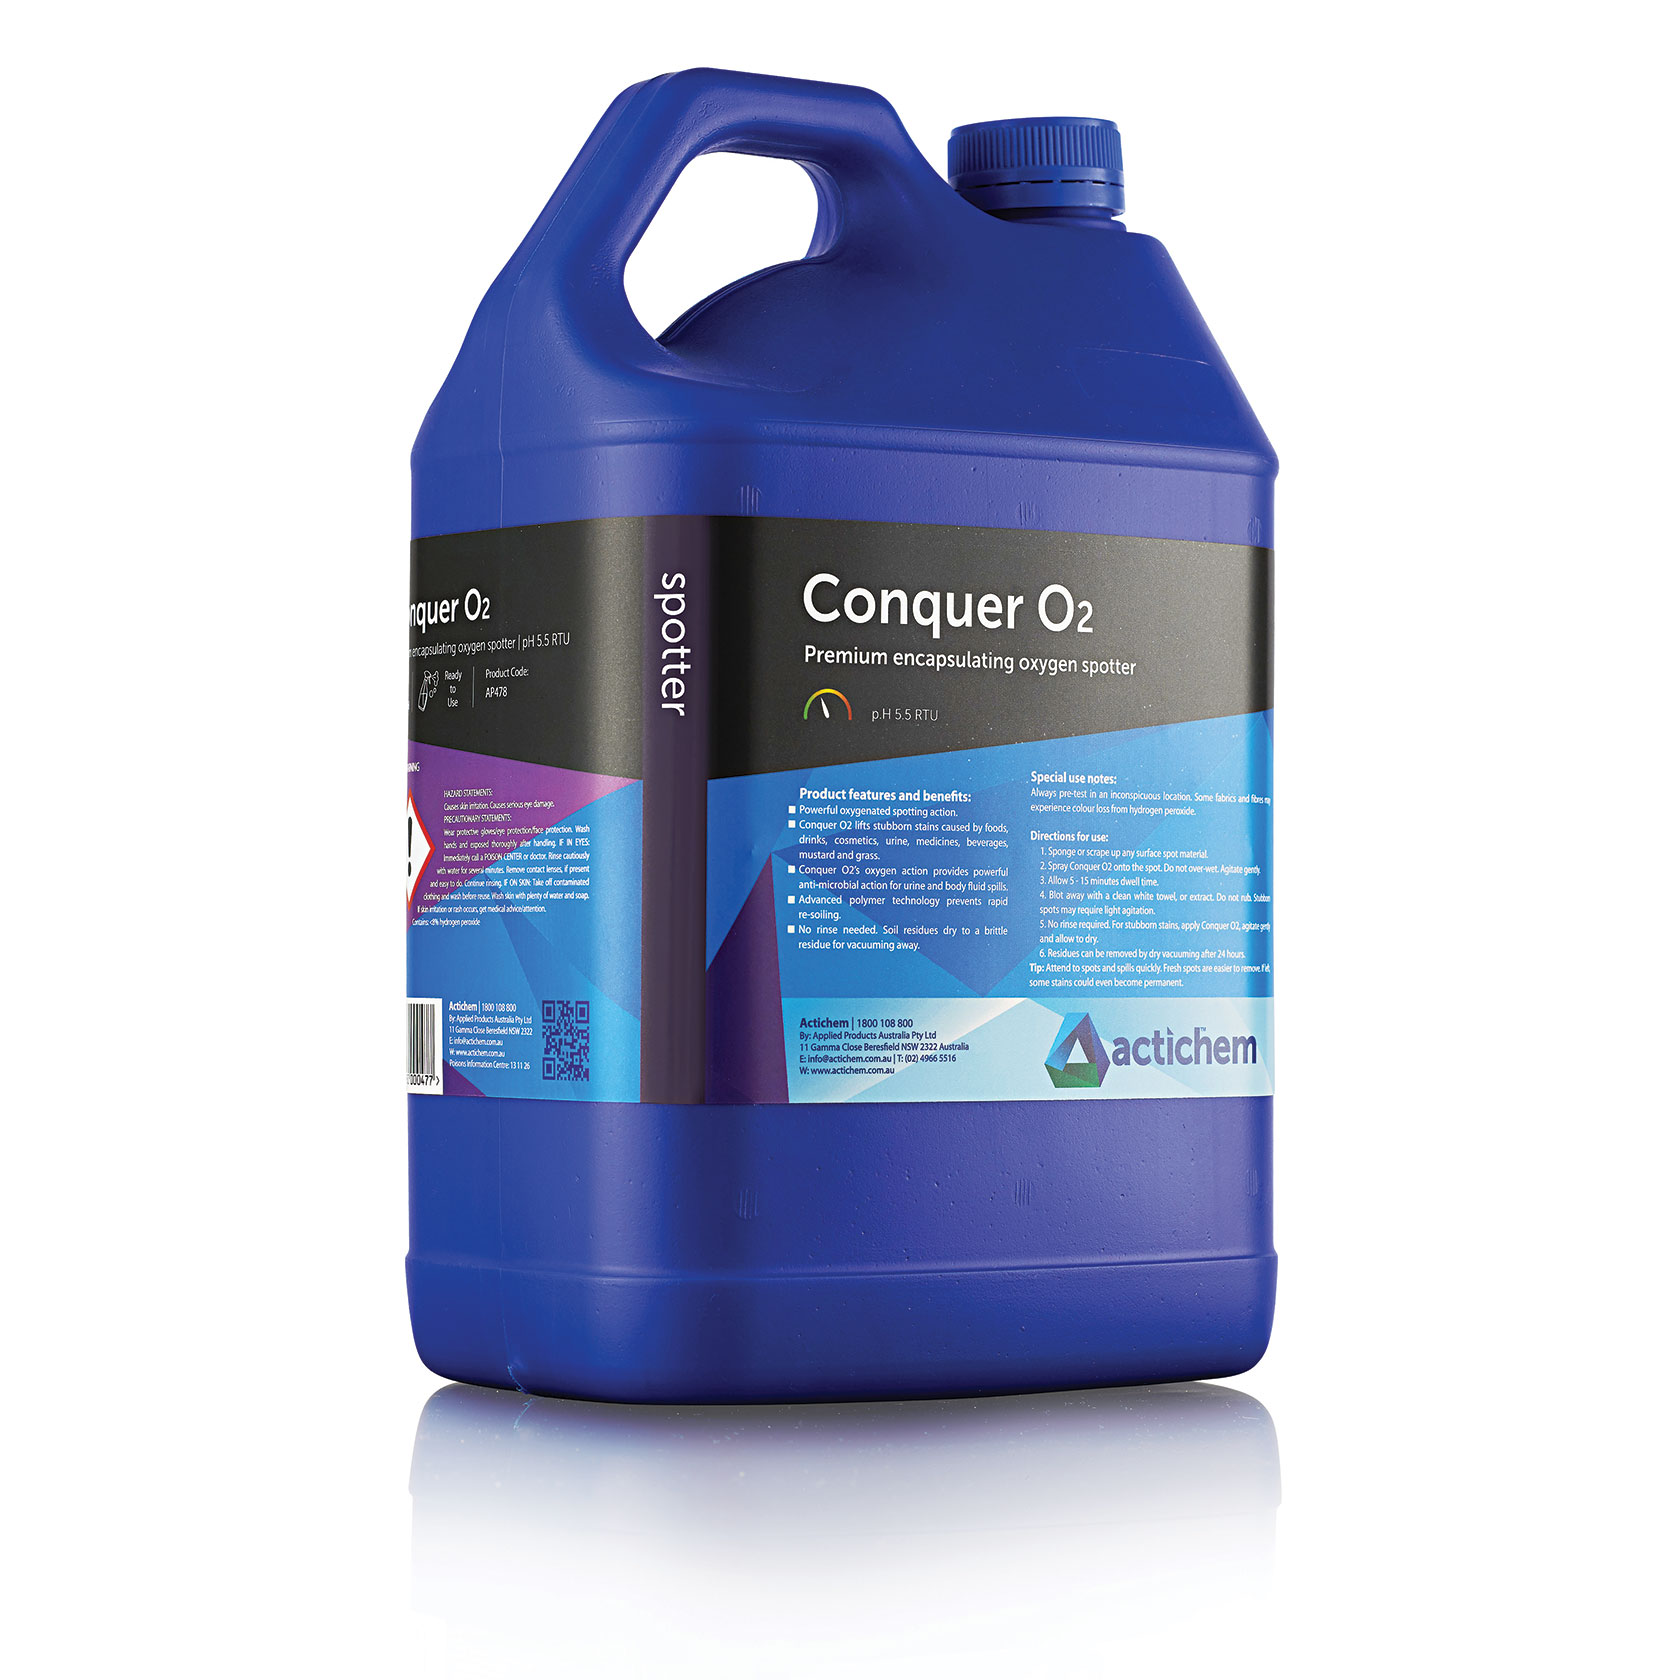 Actichem Conquer O2 stain remover for carpets & upholstery